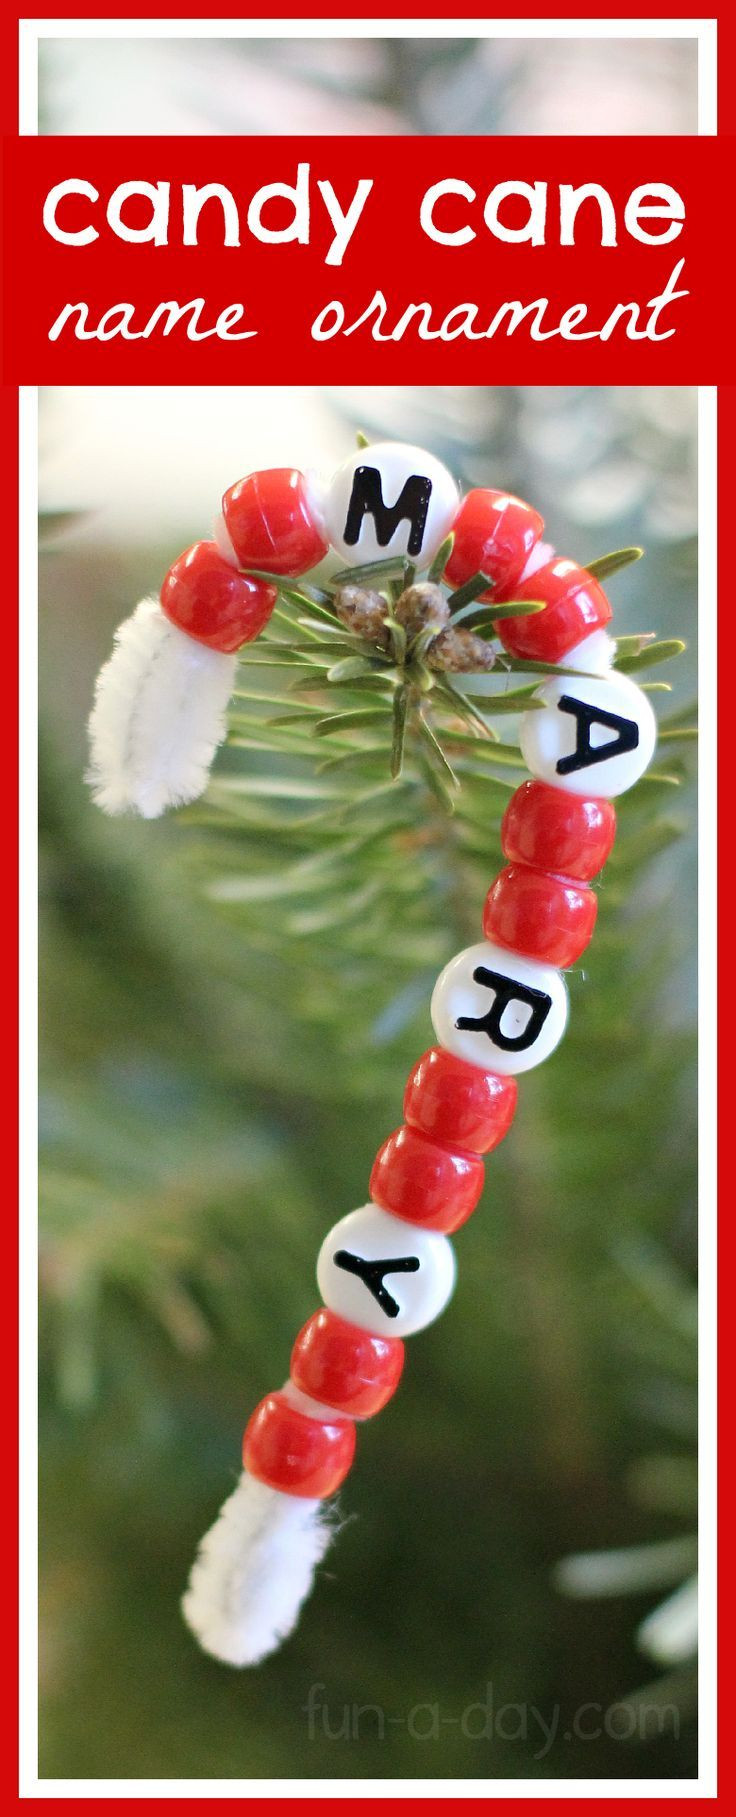 Candy Cane Crafts For Christmas
 25 Best Ideas about Candy Cane Crafts on Pinterest